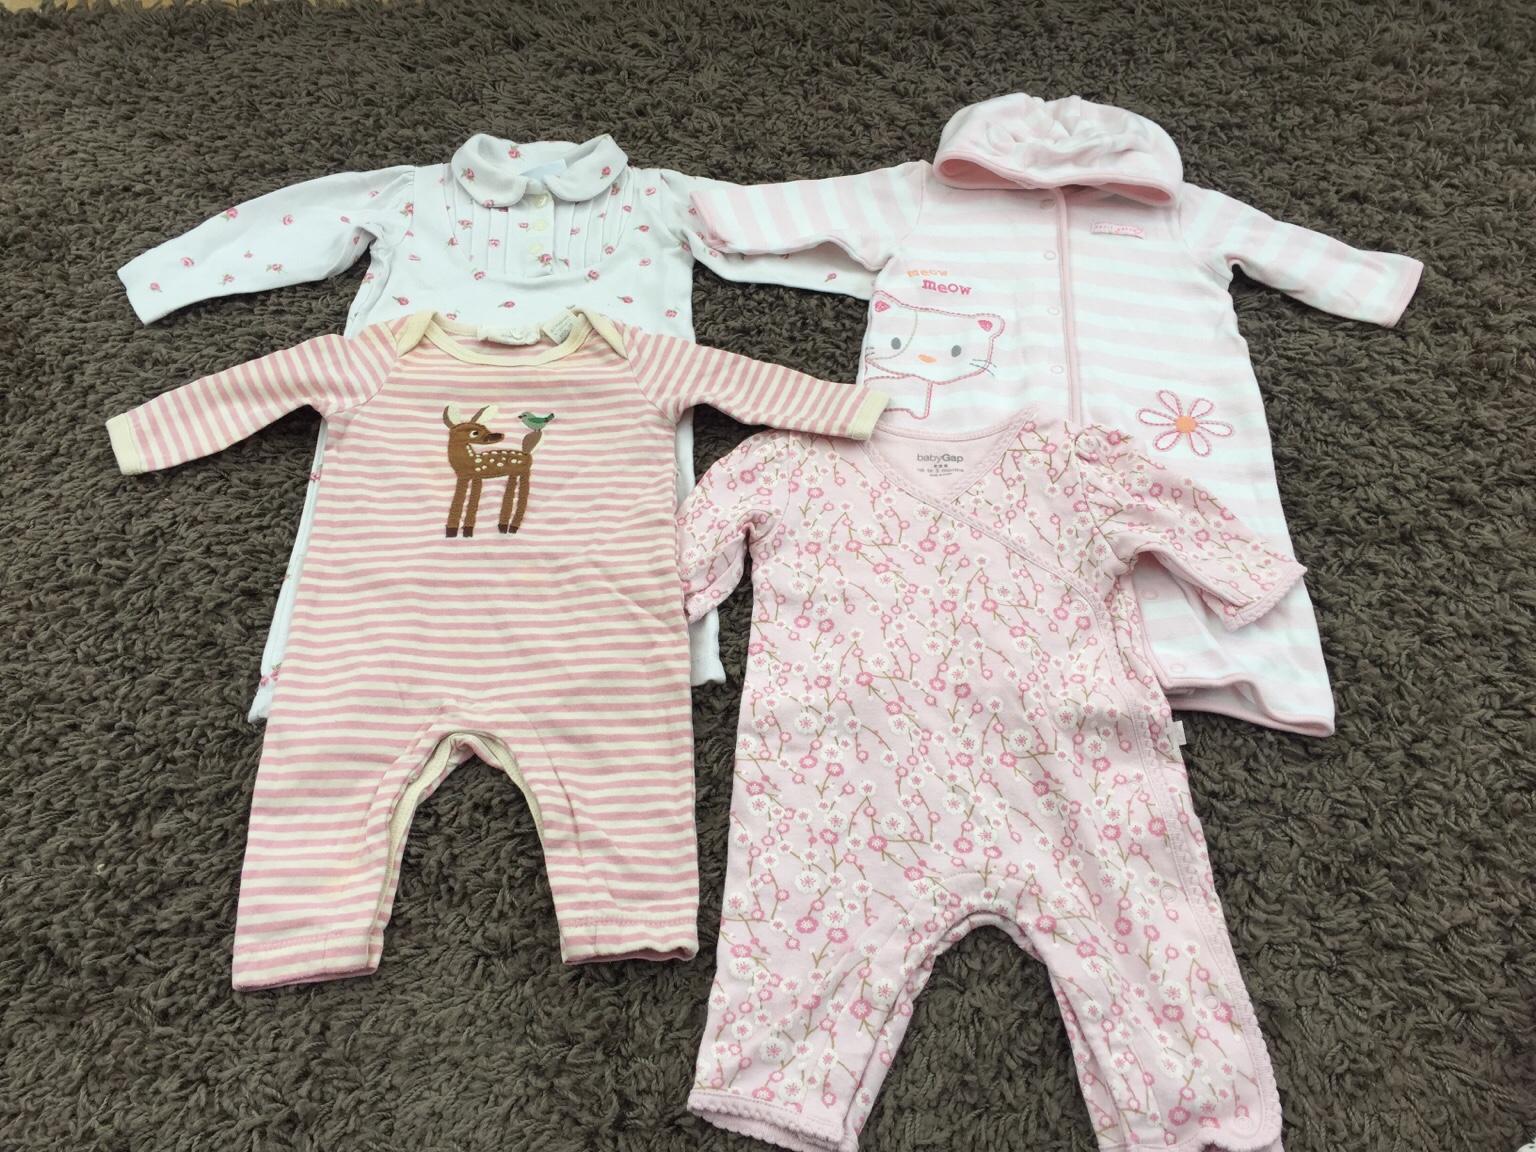 marks and spencer's baby girl clothes